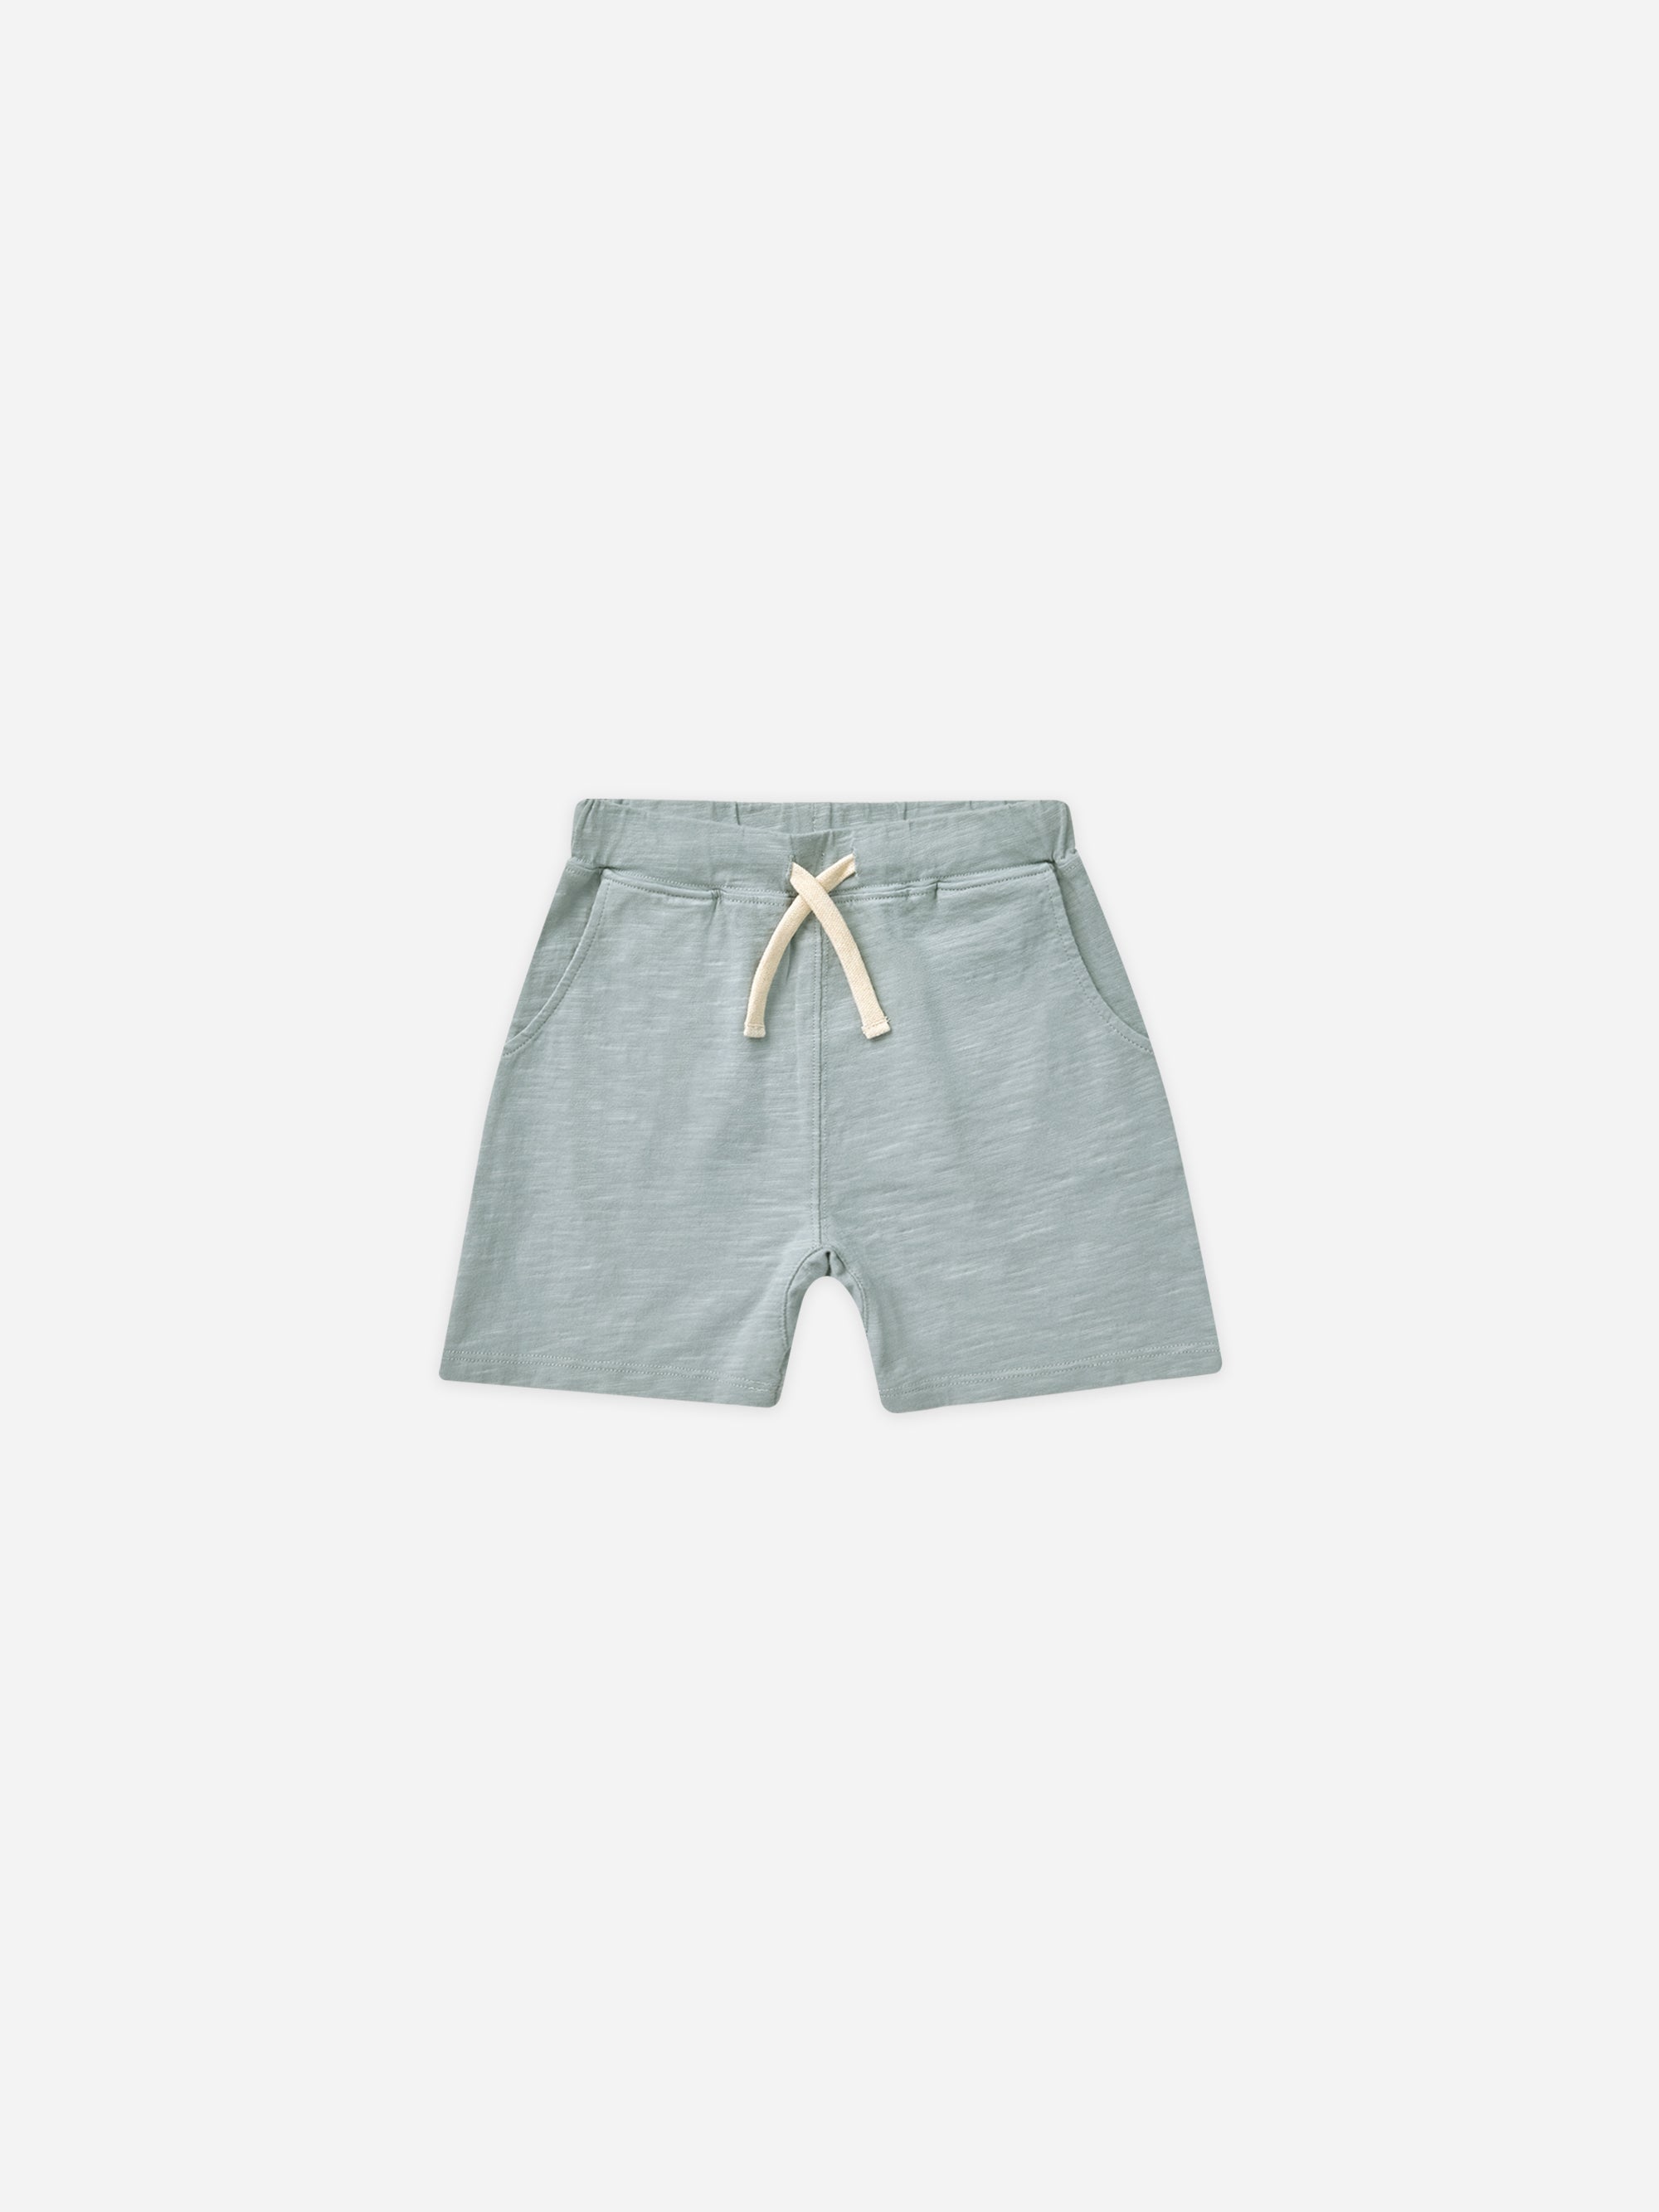 Sam Short || Blue - Rylee + Cru | Kids Clothes | Trendy Baby Clothes | Modern Infant Outfits |